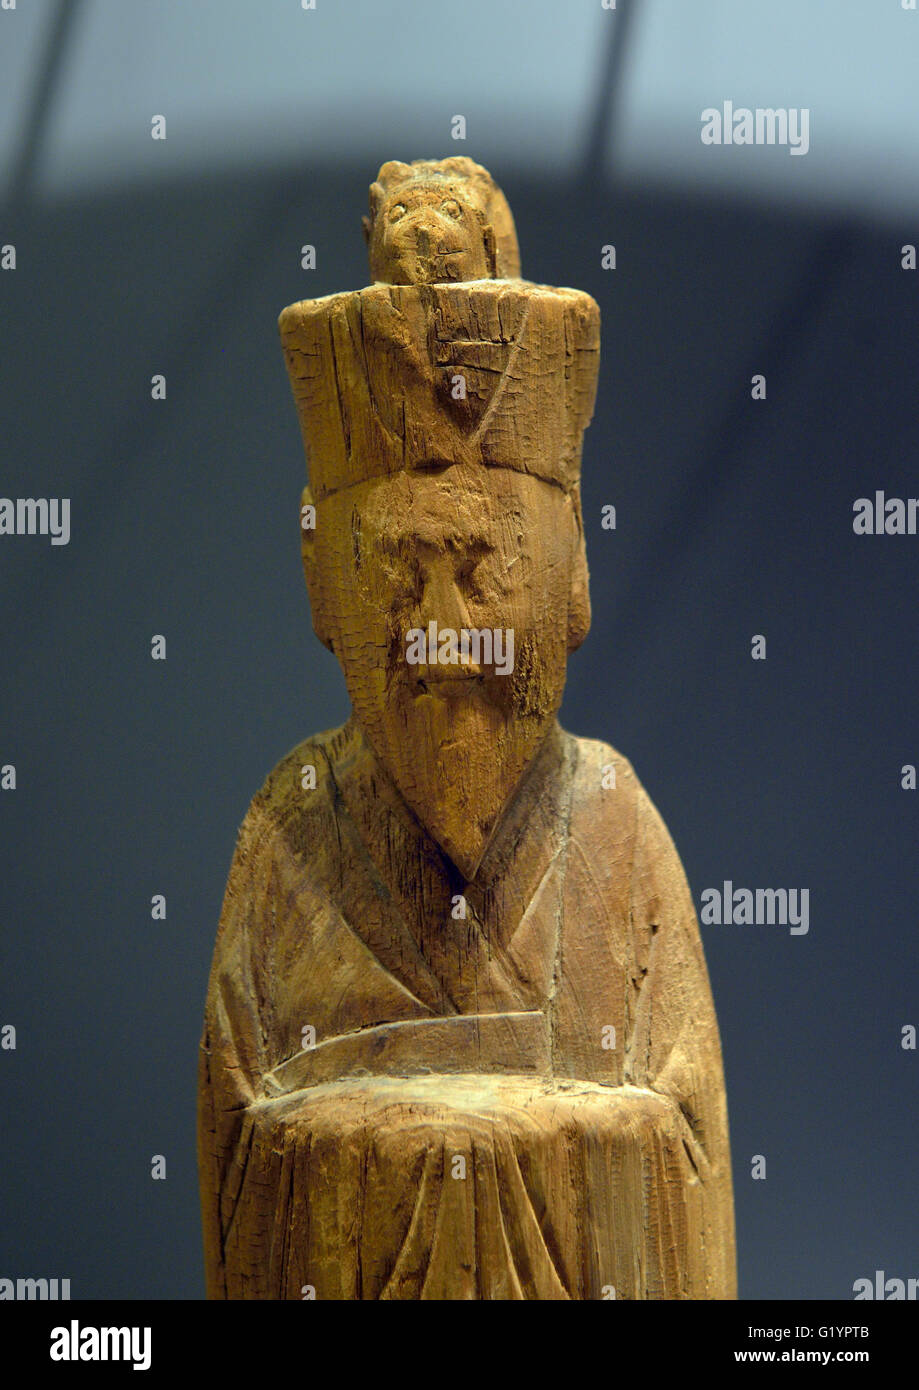 Wooden figurine of Chinese zodiac - a man under rat sign. Liao dynasty (916－1125) Capital Museum, Beijing, China. Stock Photo